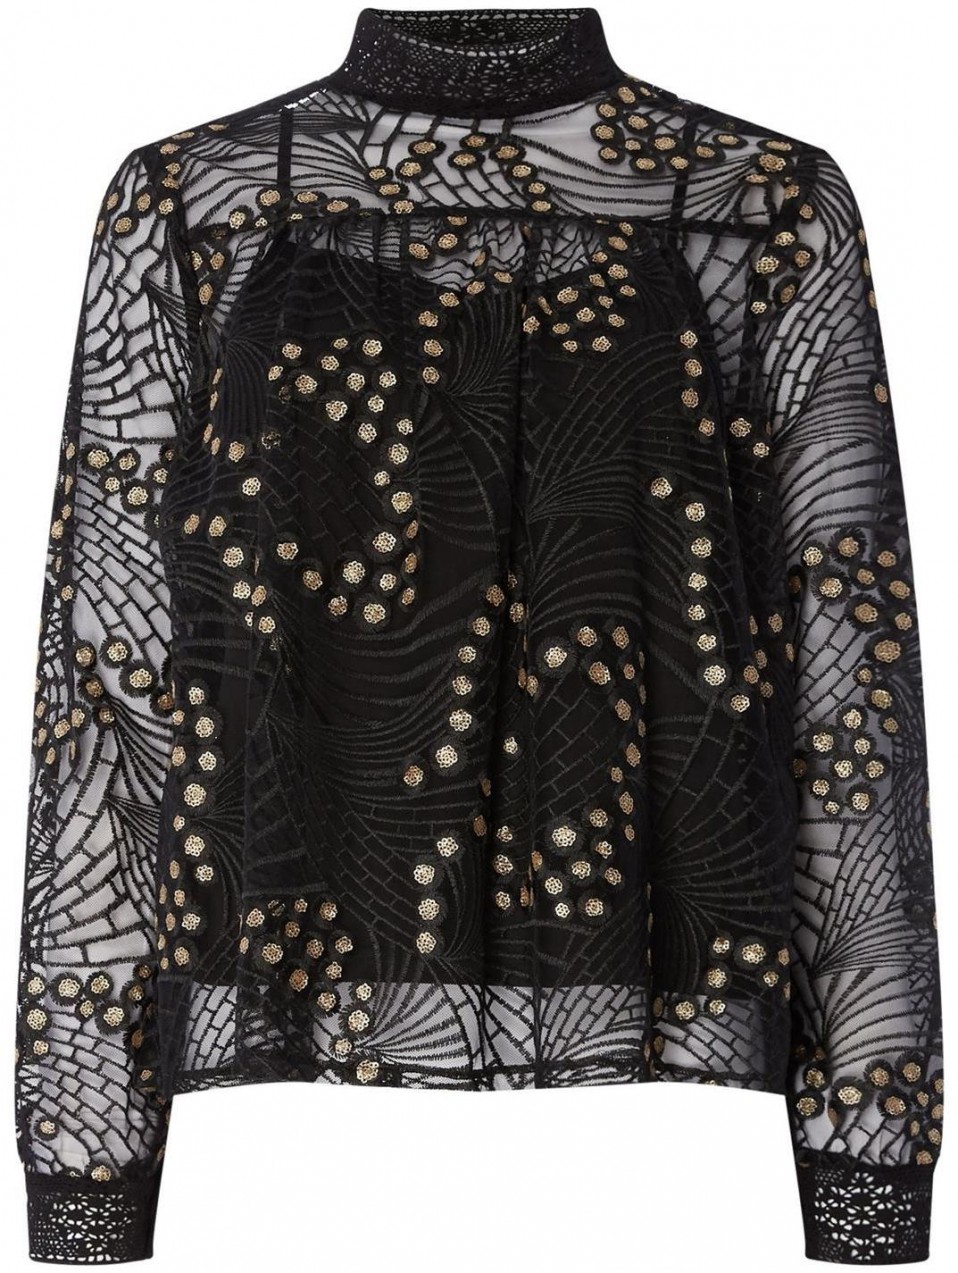 Biba Lace and Sequin Blouse